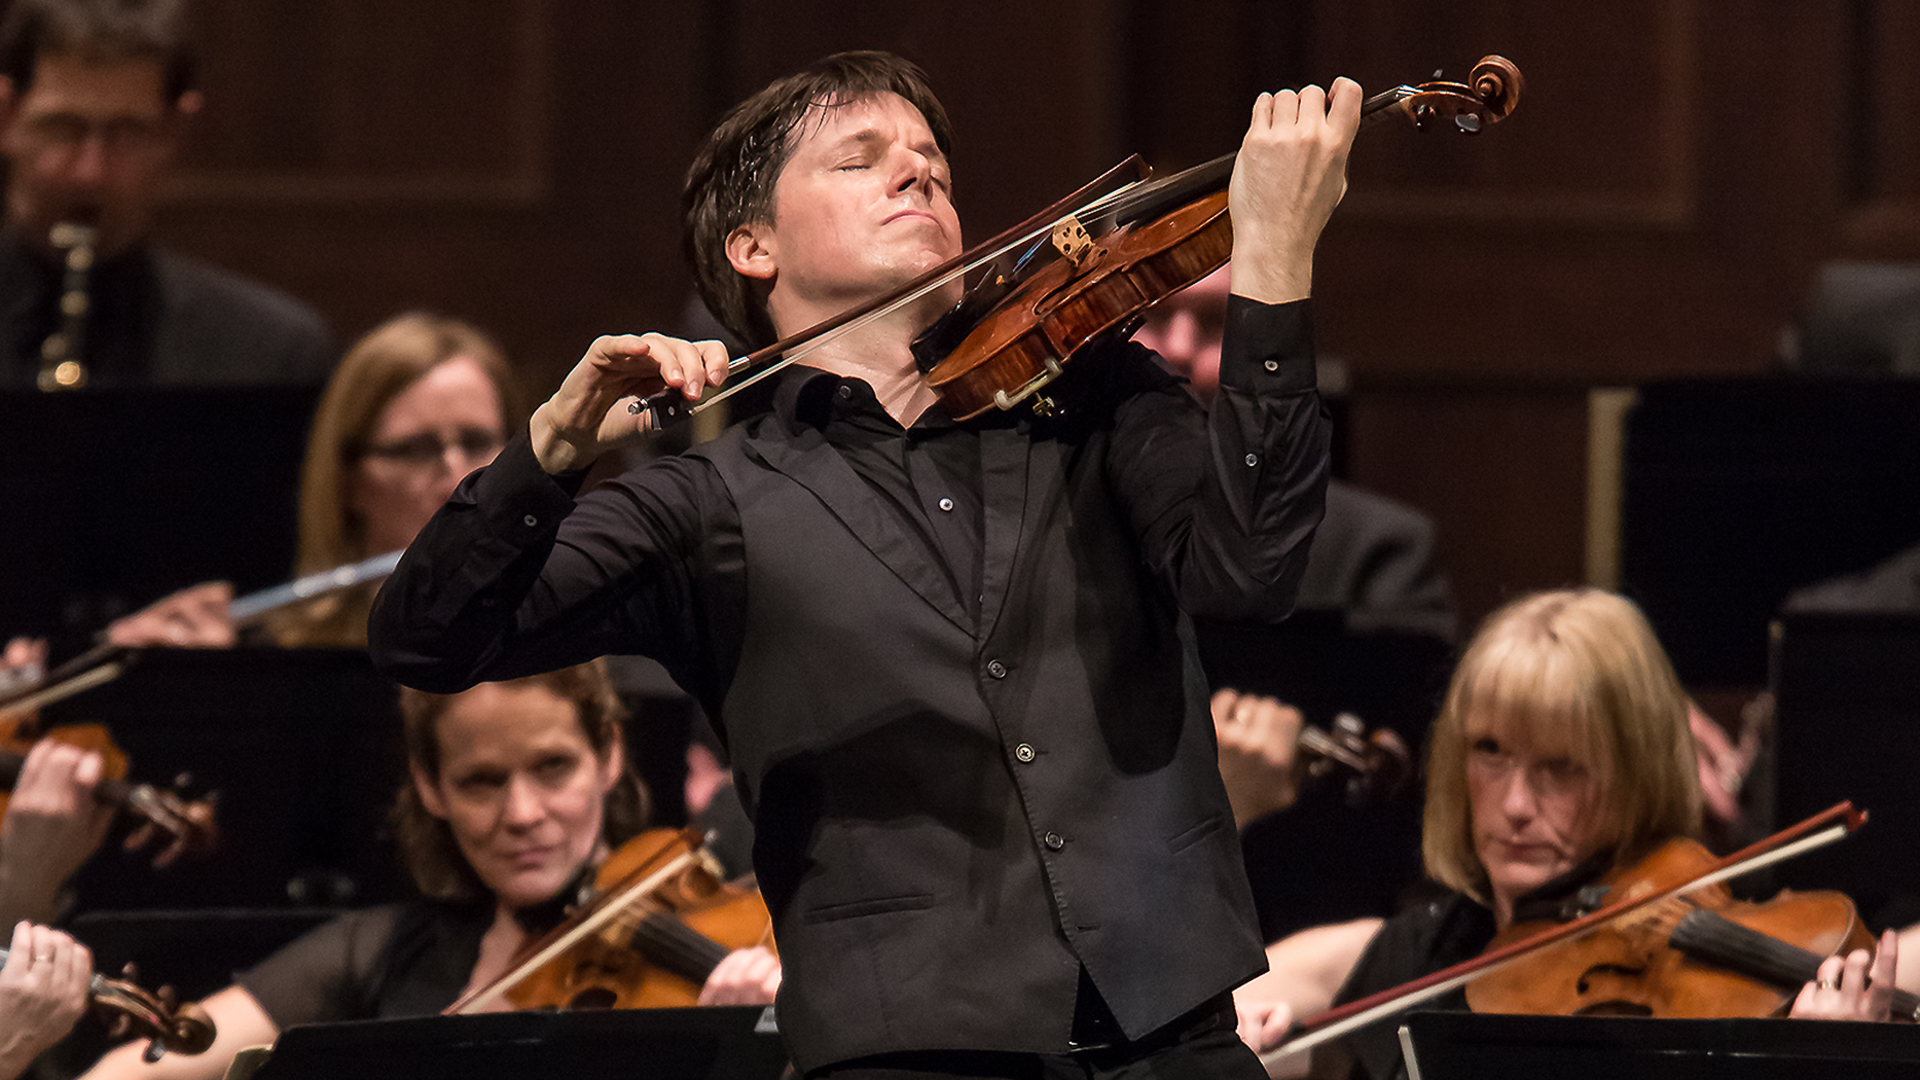 The Continuing Journey of Violinist Joshua Bell Cultural Attaché